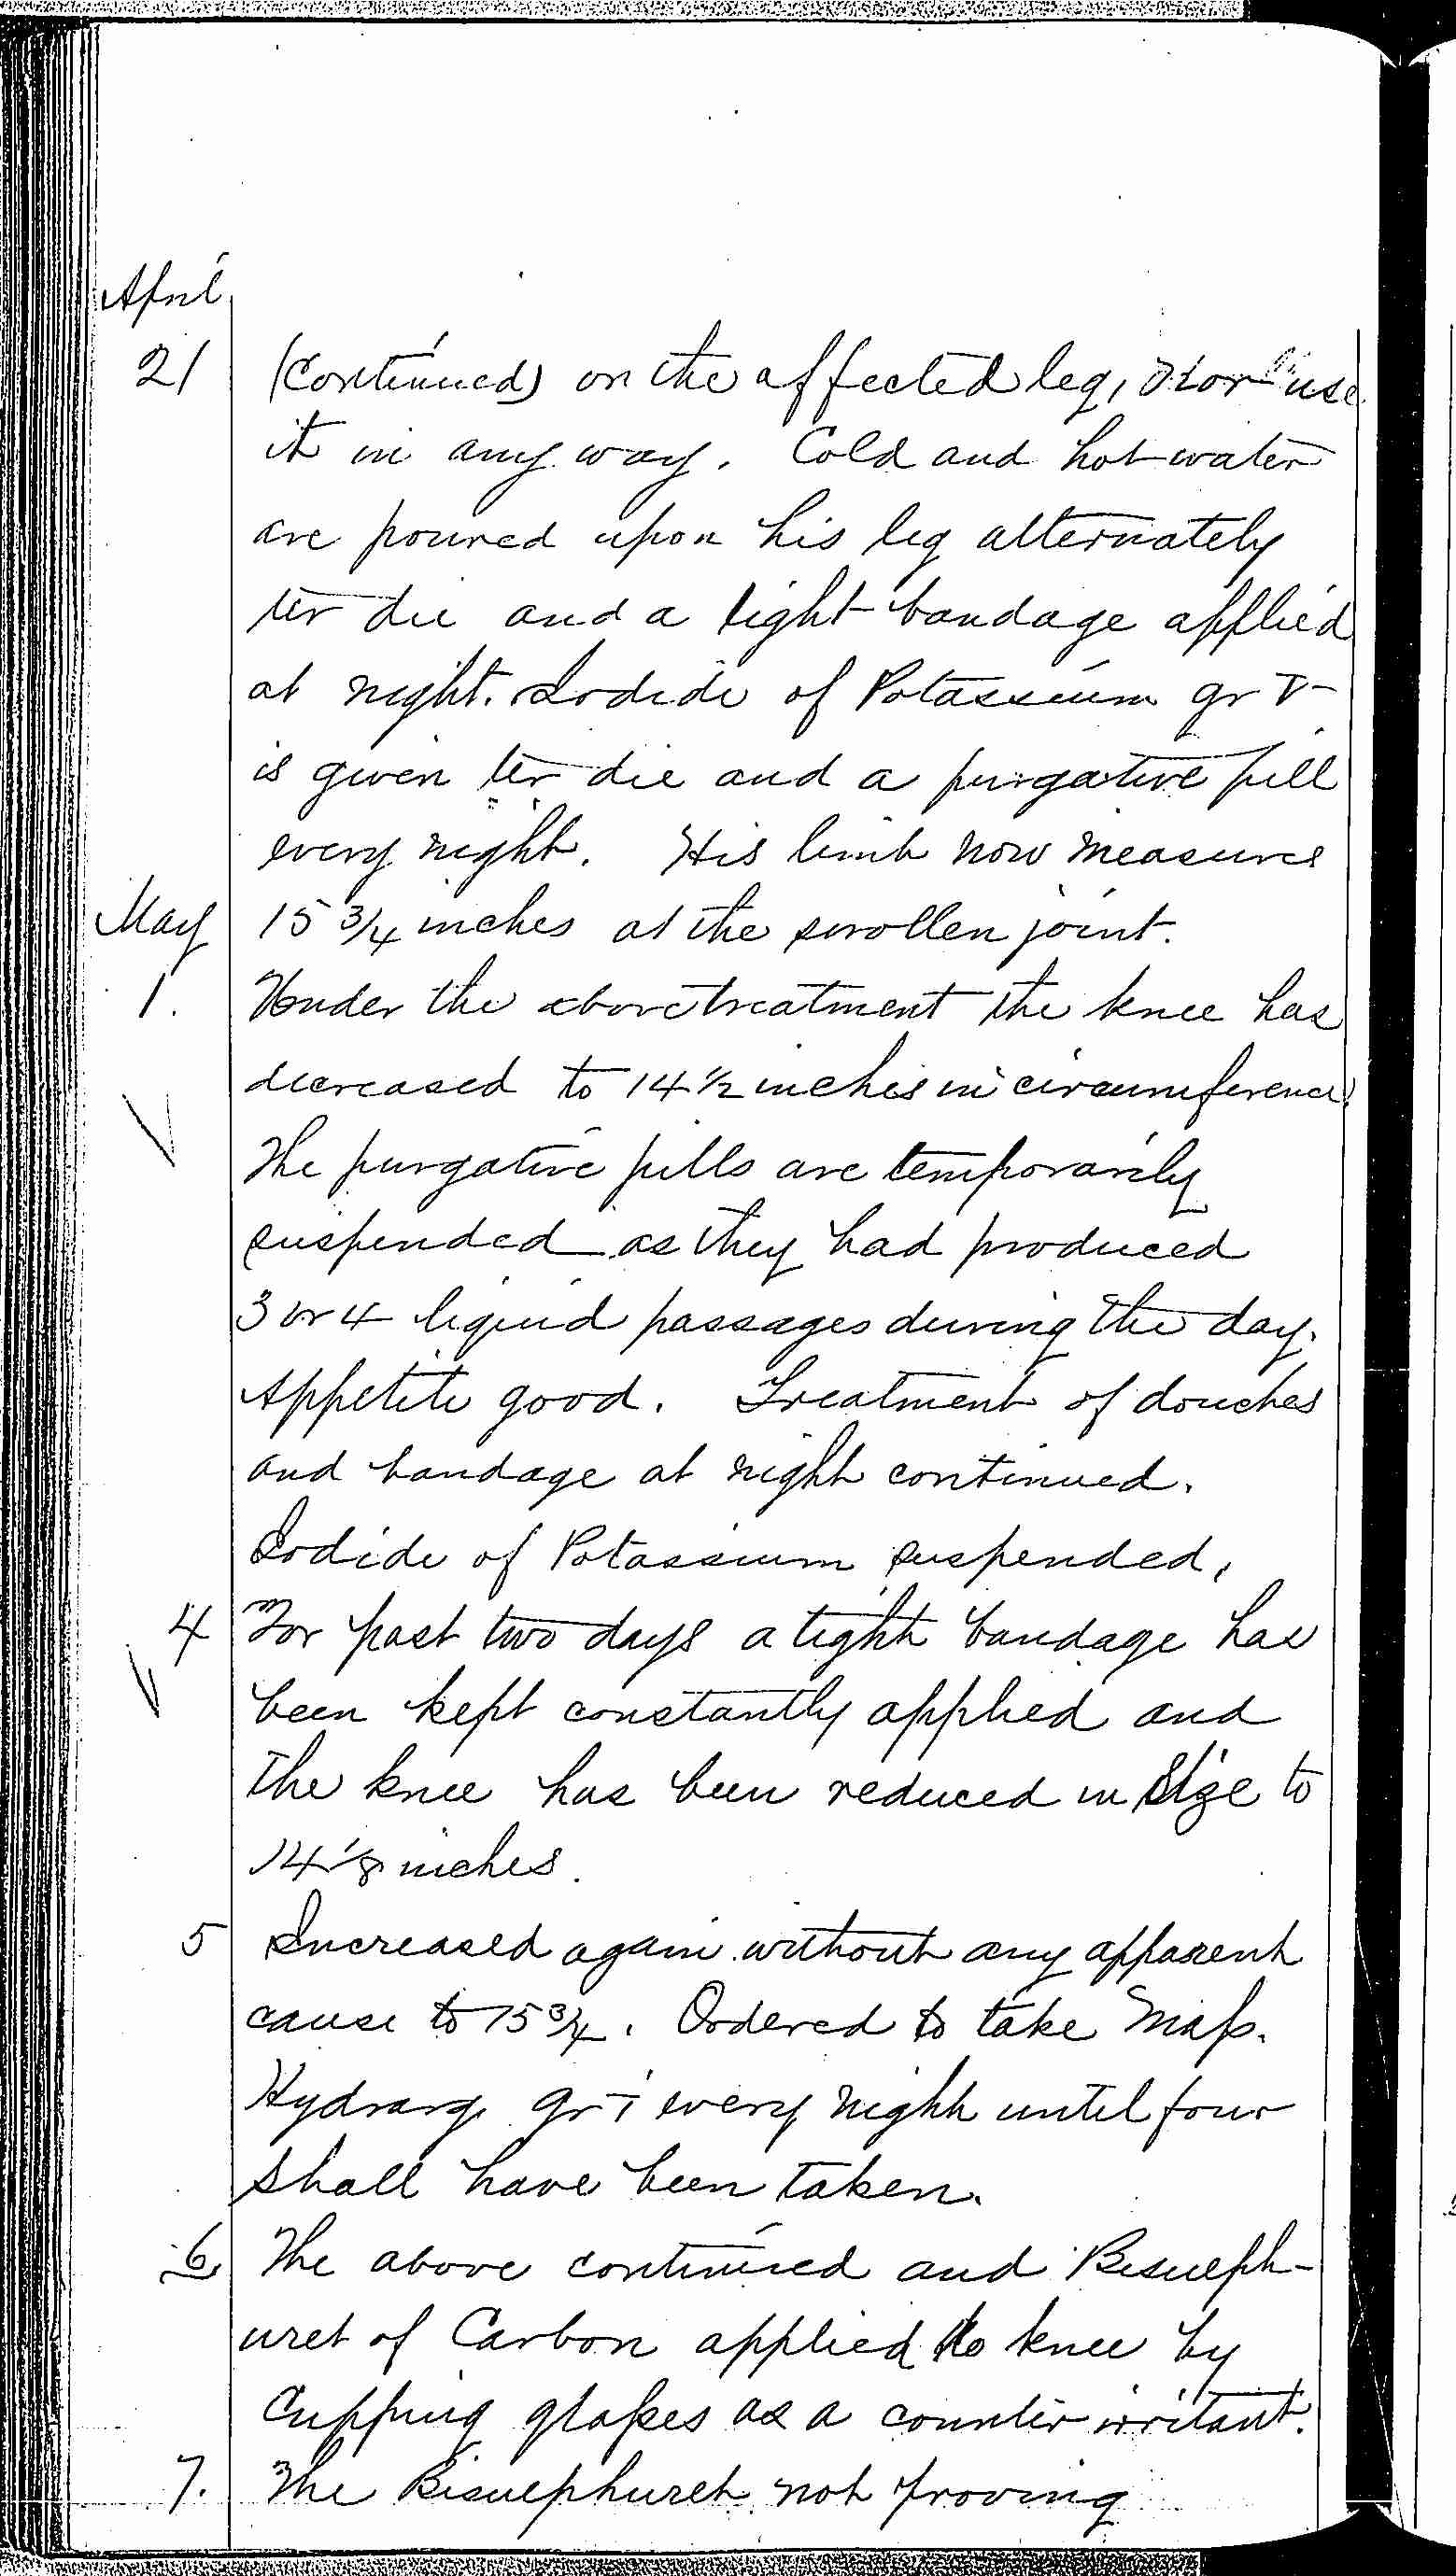 Entry for Henry James (page 6 of 8) in the log Hospital Tickets and Case Papers - Naval Hospital - Washington, D.C. - 1868-69